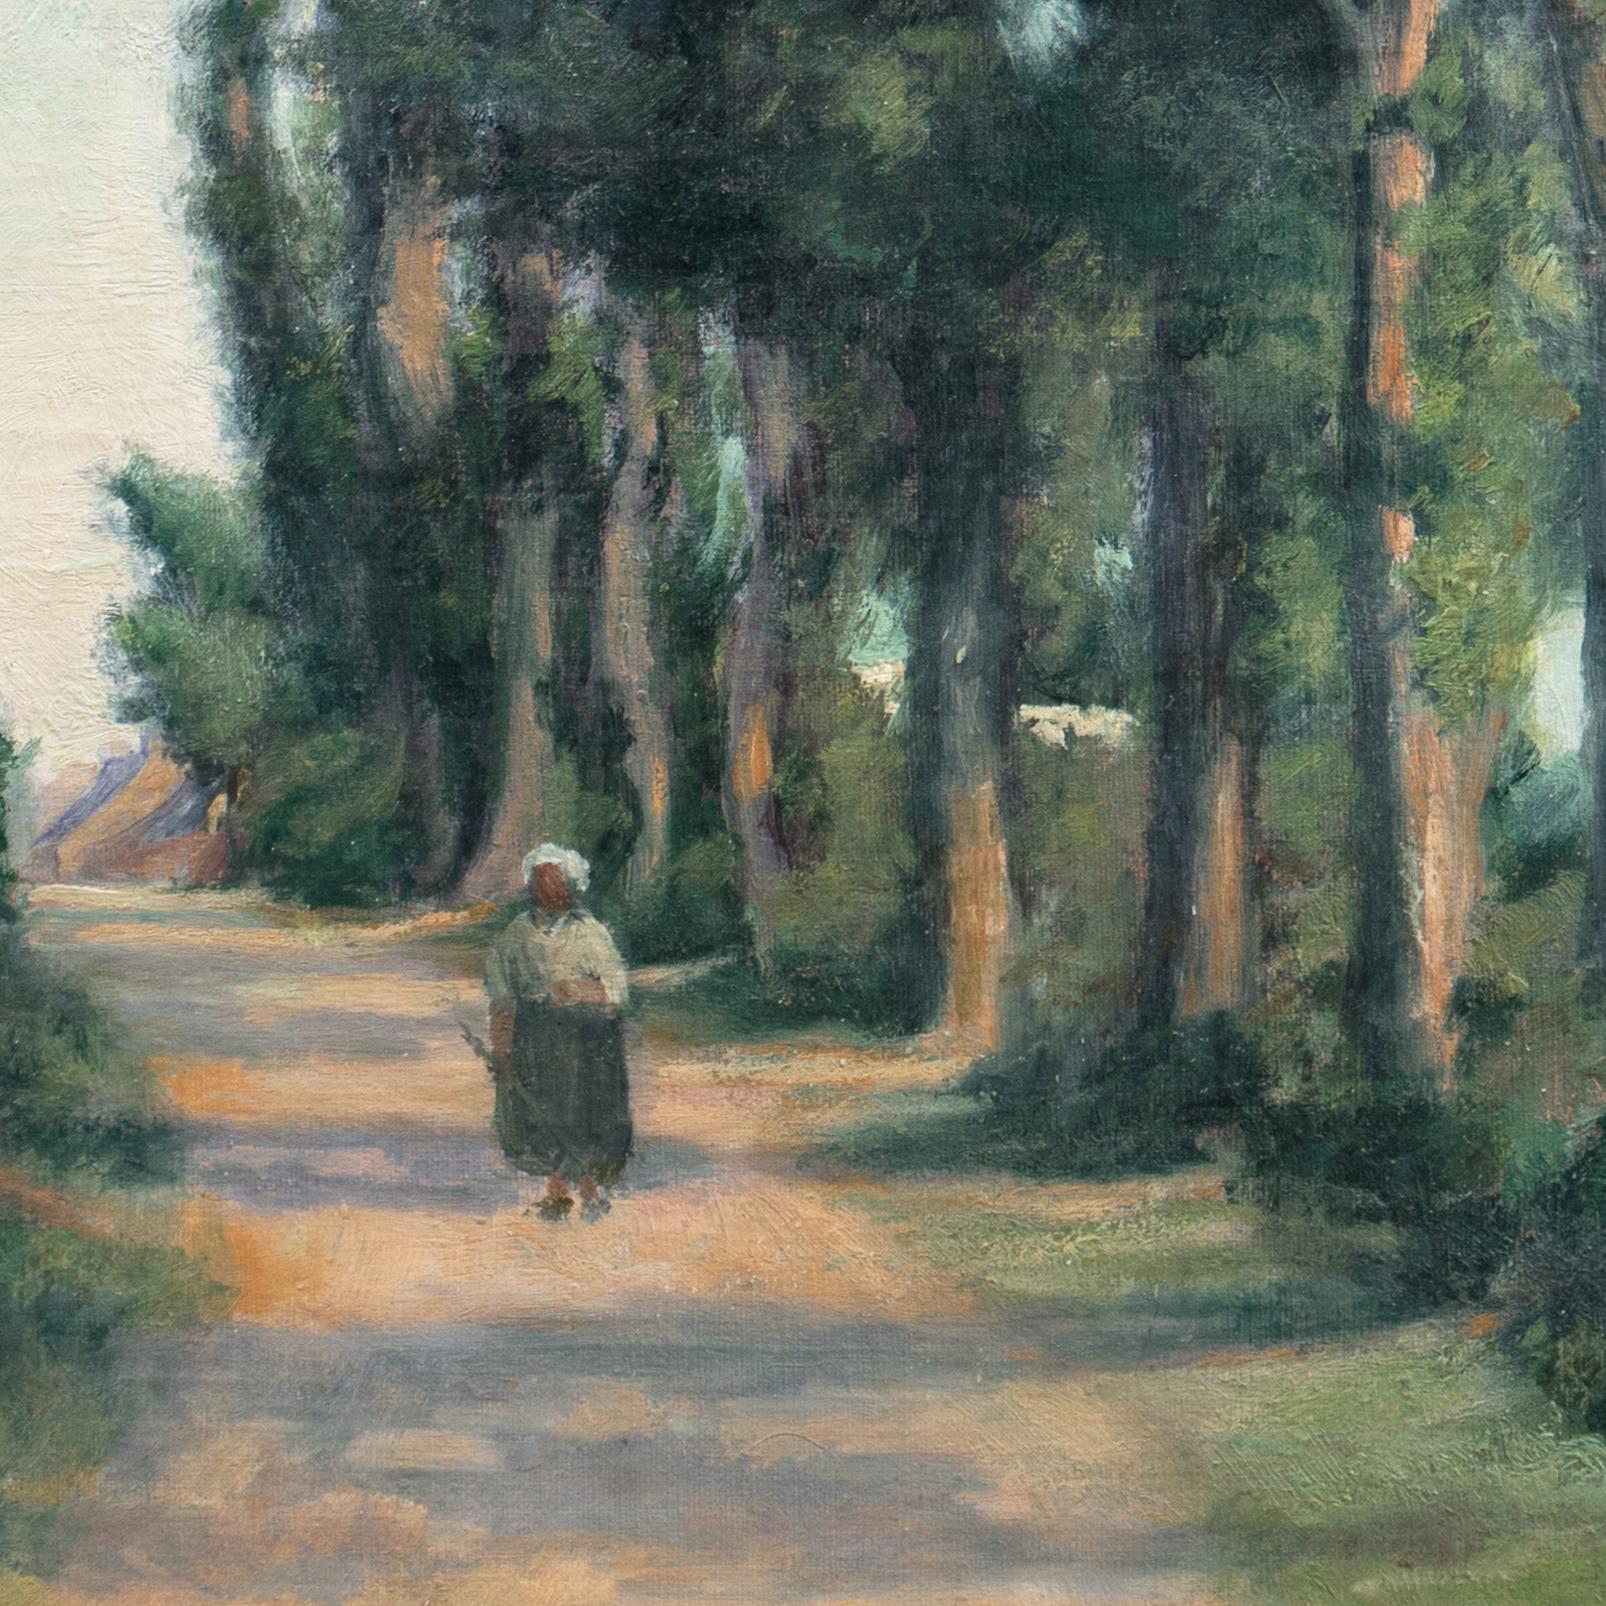 'Eucalyptus Road, Sunset', Early 20th Century, American Impressionist Landscape - Painting by American School